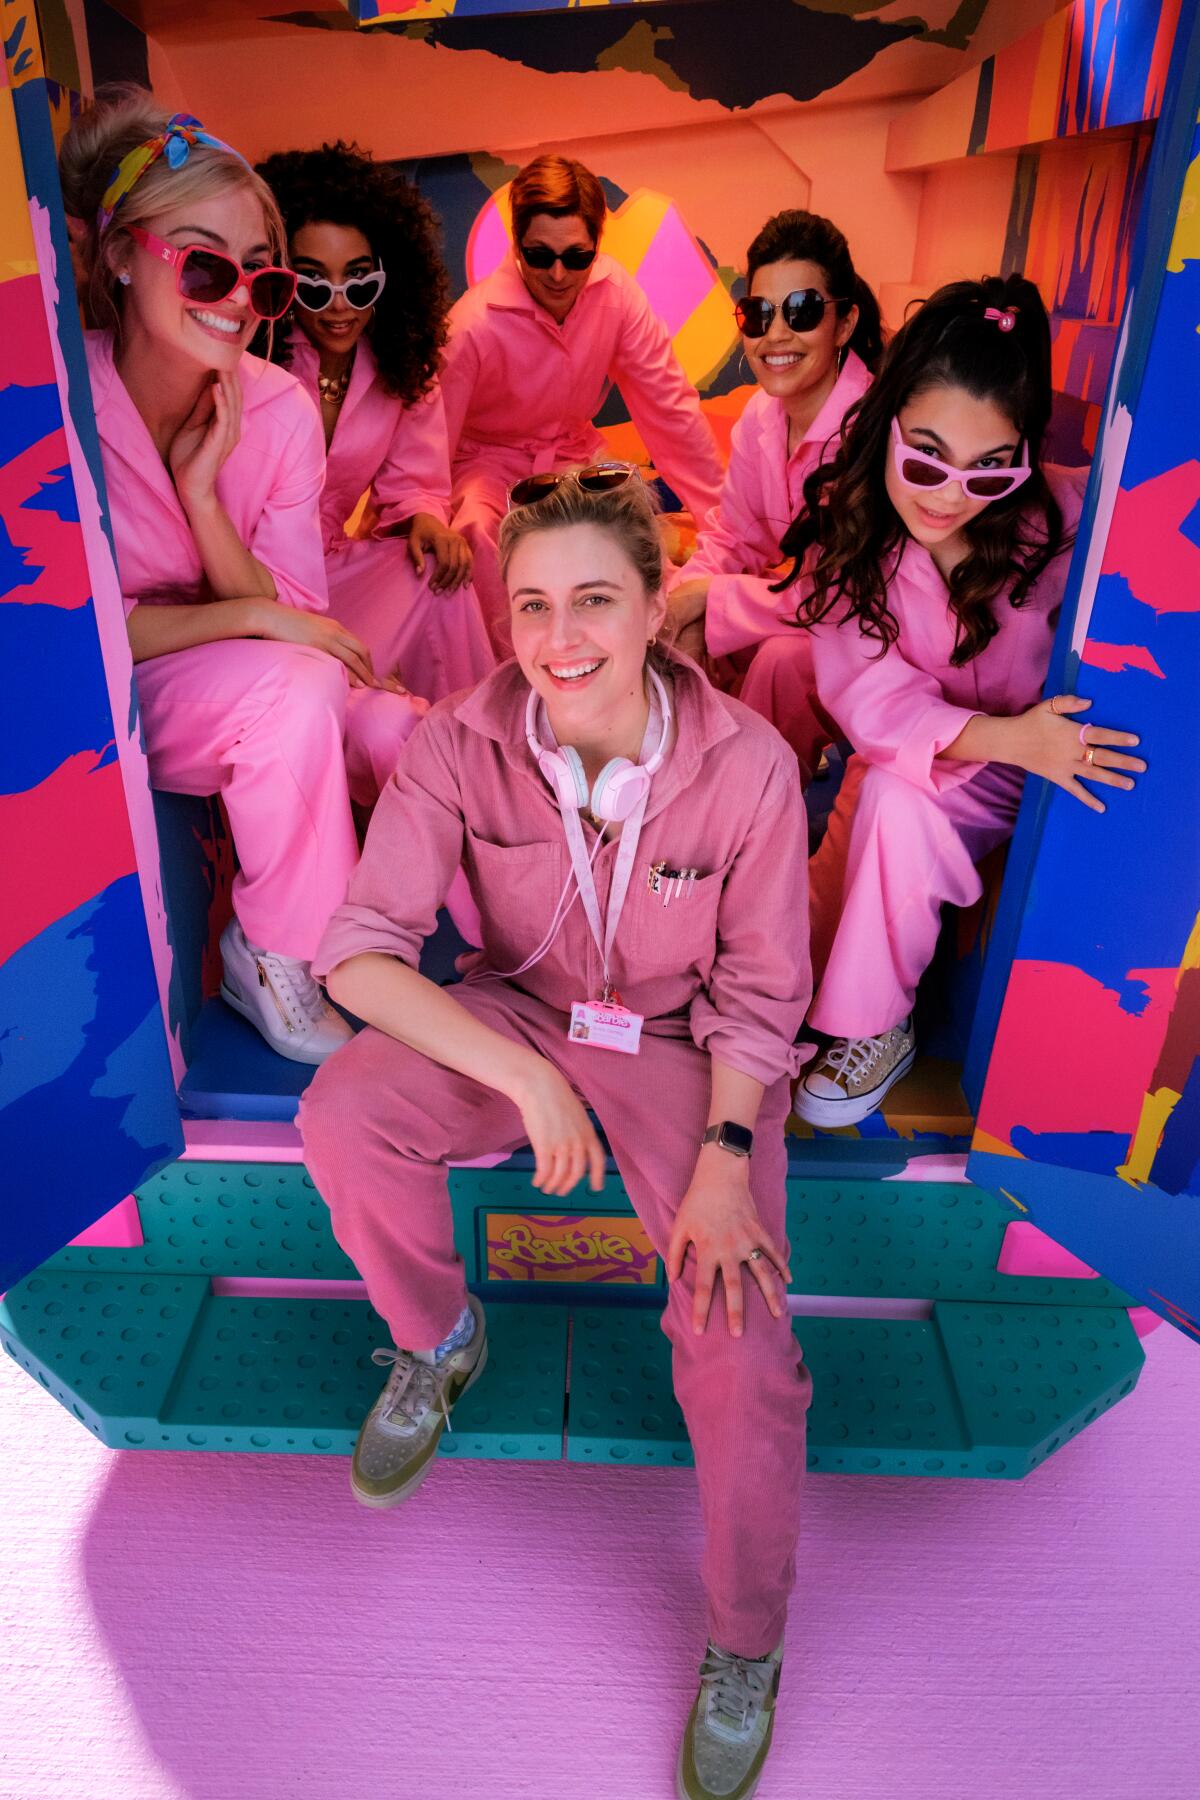 Greta Gerwig and the cast of a 'Barbie,' all dressed in pink, pose for a photo in the back of a pink truc.